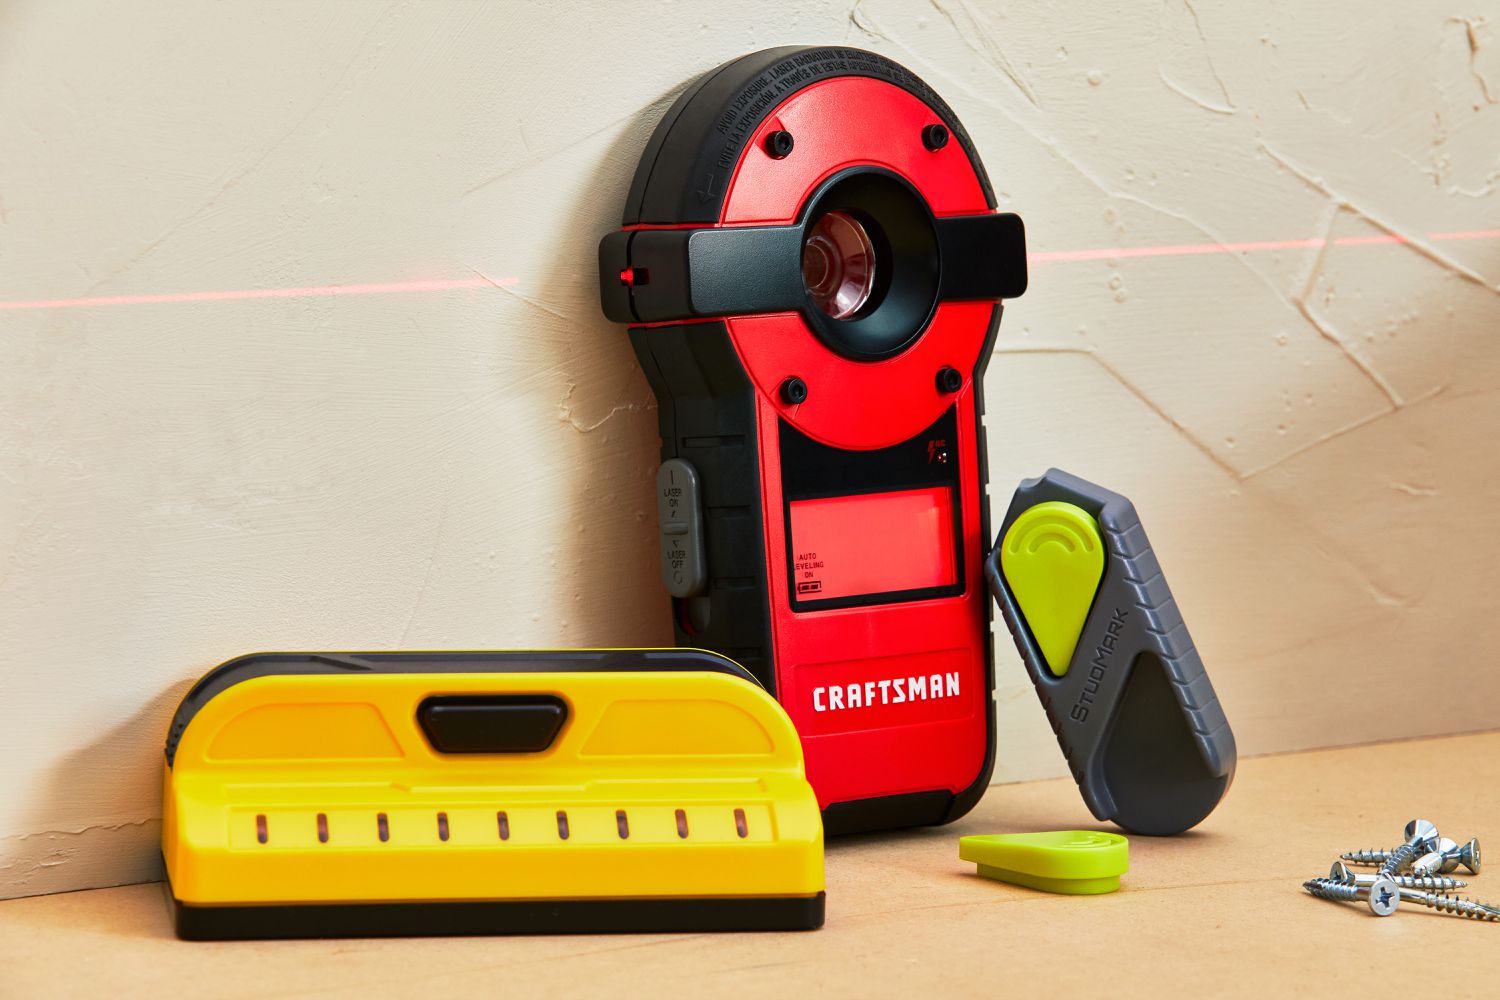 How To Use A Craftsman Laser Level